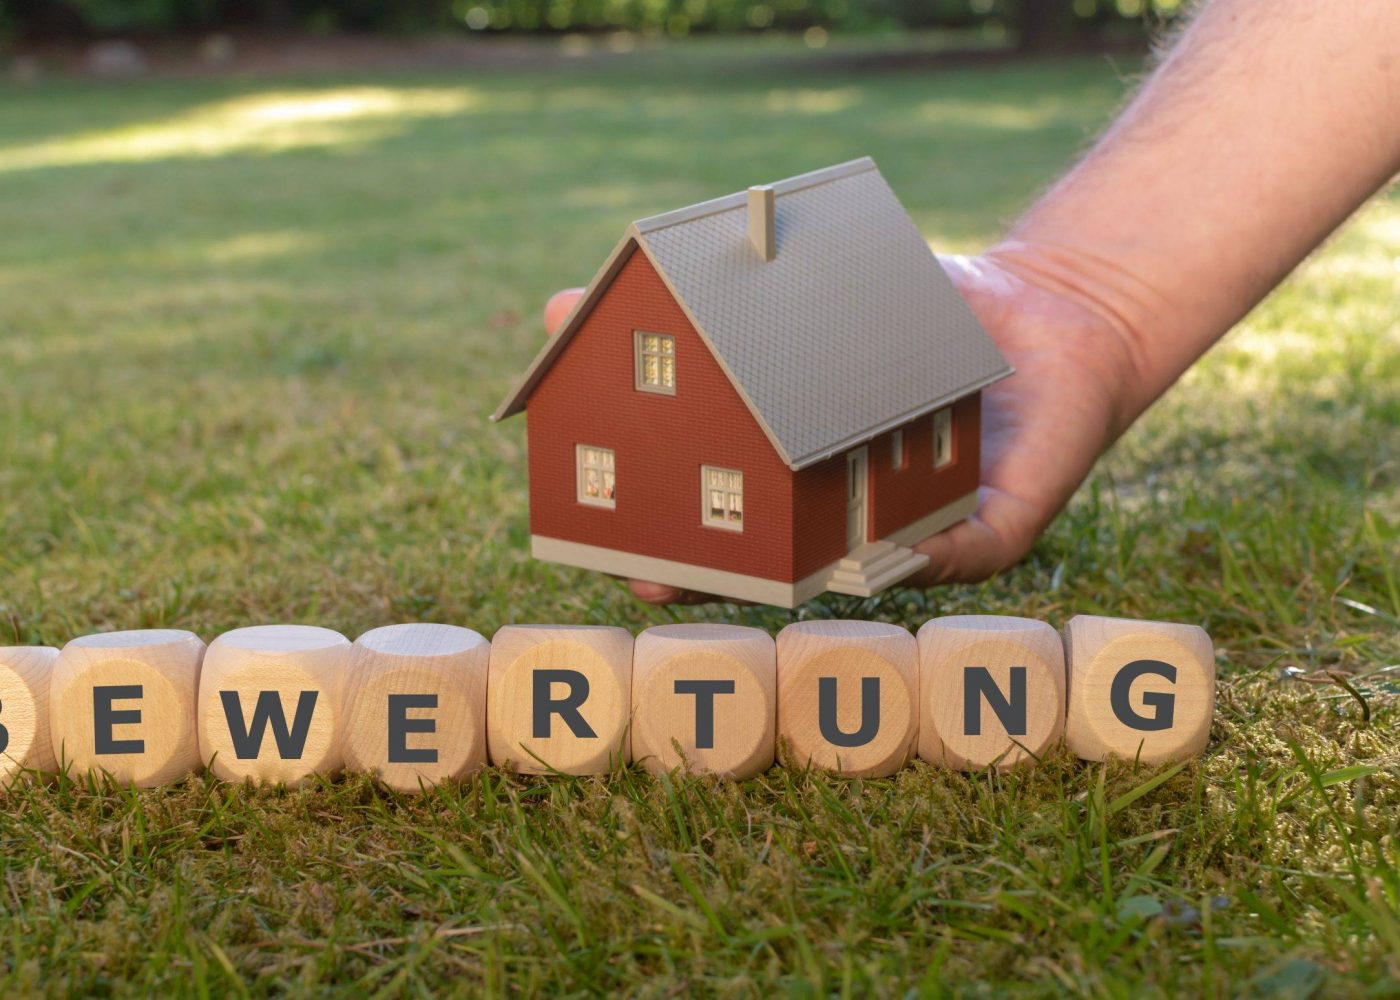 Cubes form the German word "Bewertung" ( "appraisal" in English) in front of a model house.